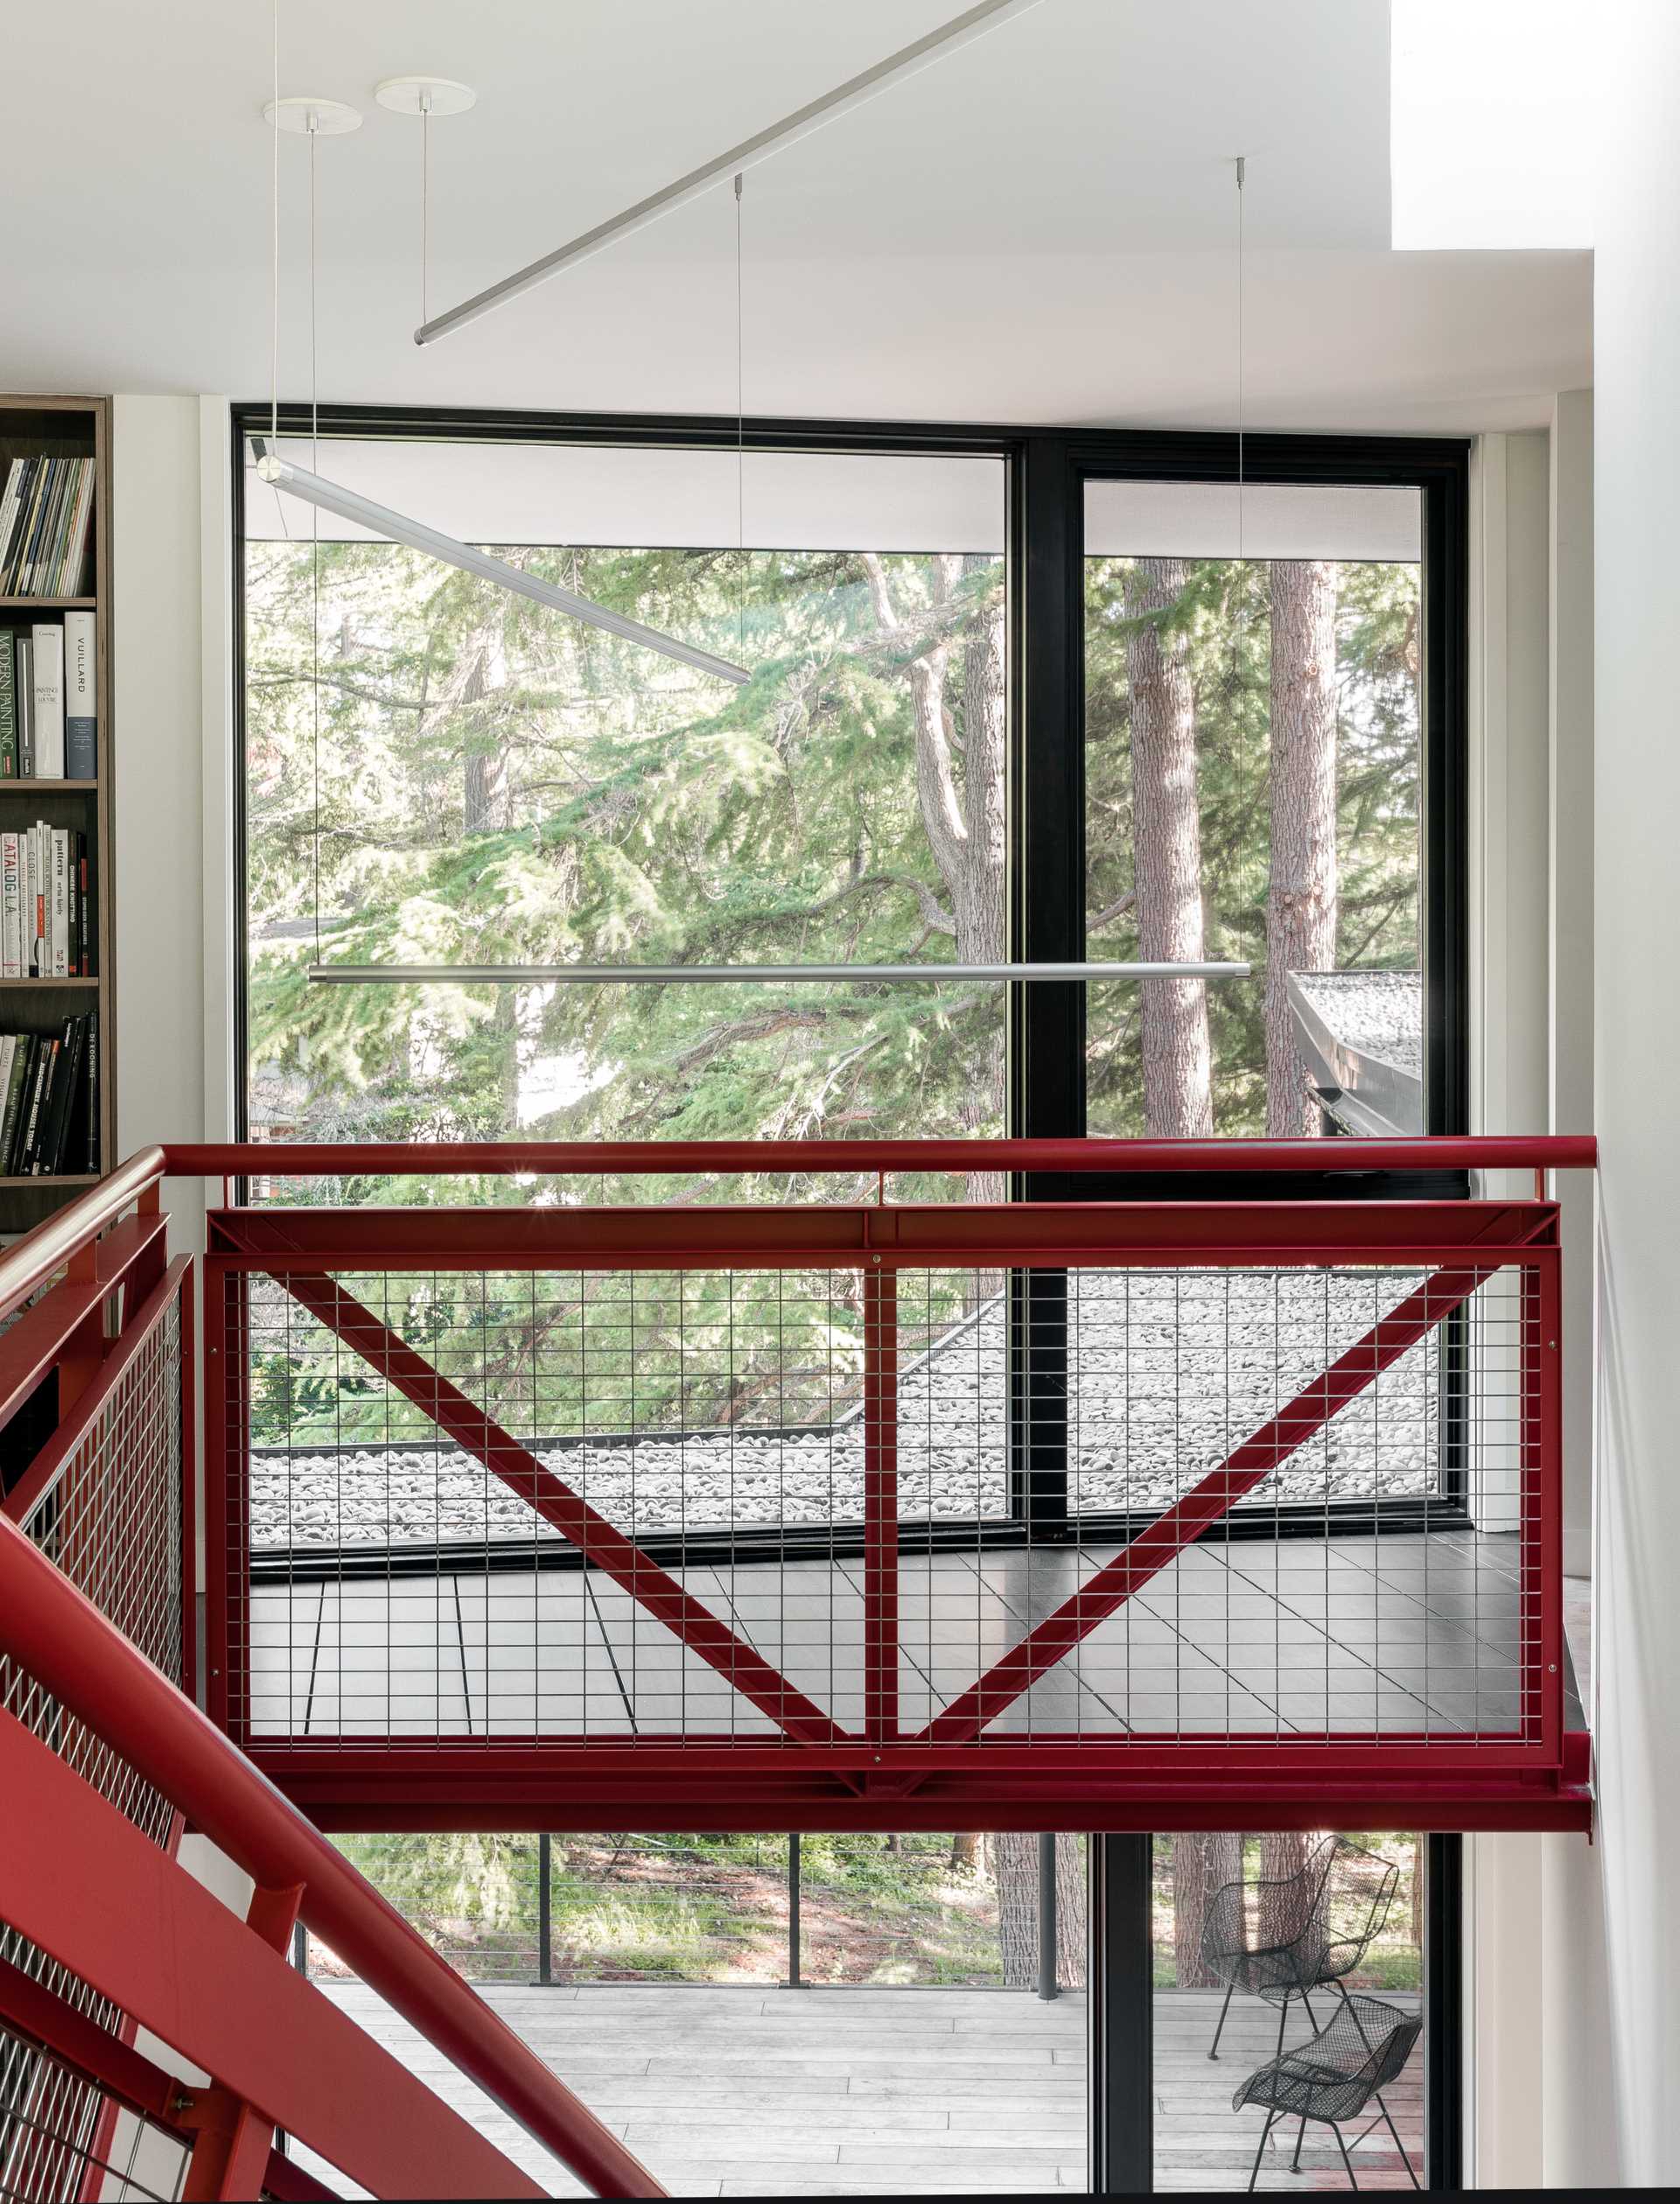 A red metal staircase designed by DeForest, connects the main living level of the ،me with the upper level.